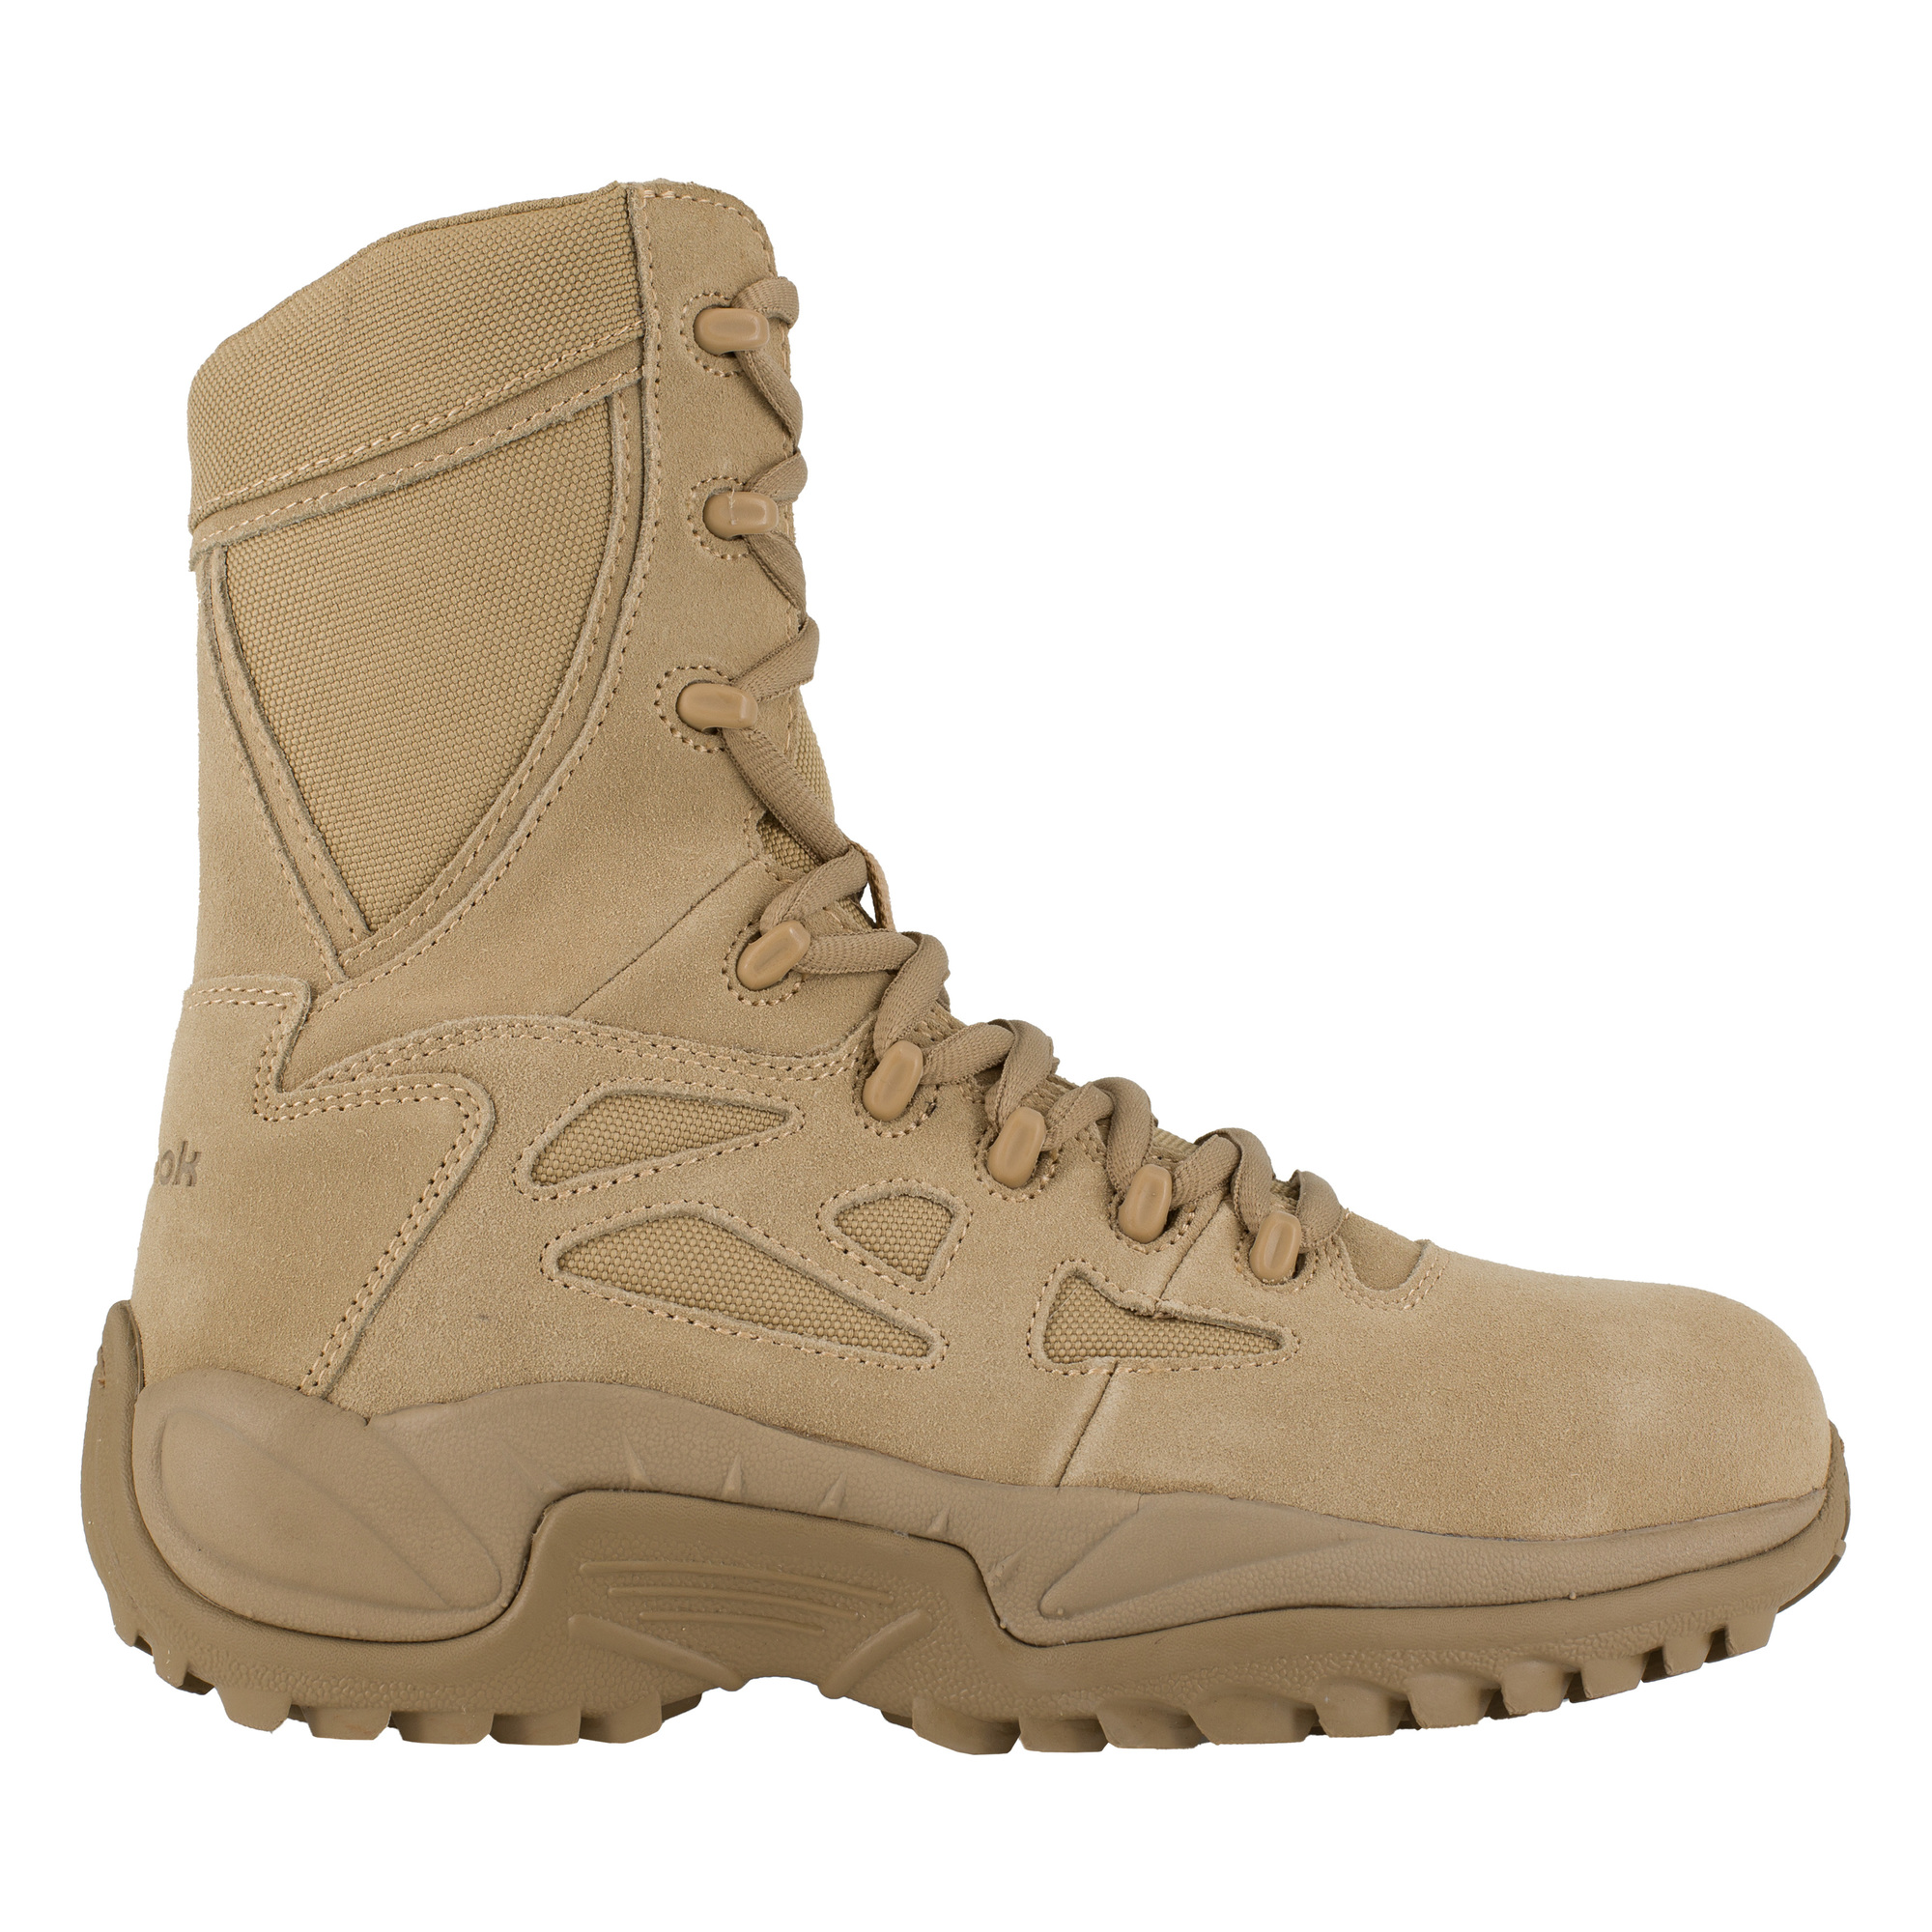 Reebok, 8Inch Stealth Tactical Boot with Side Zipper, Size 11, Width Medium, Color Desert Tan, Model RB894 -  RB894-M-11.0